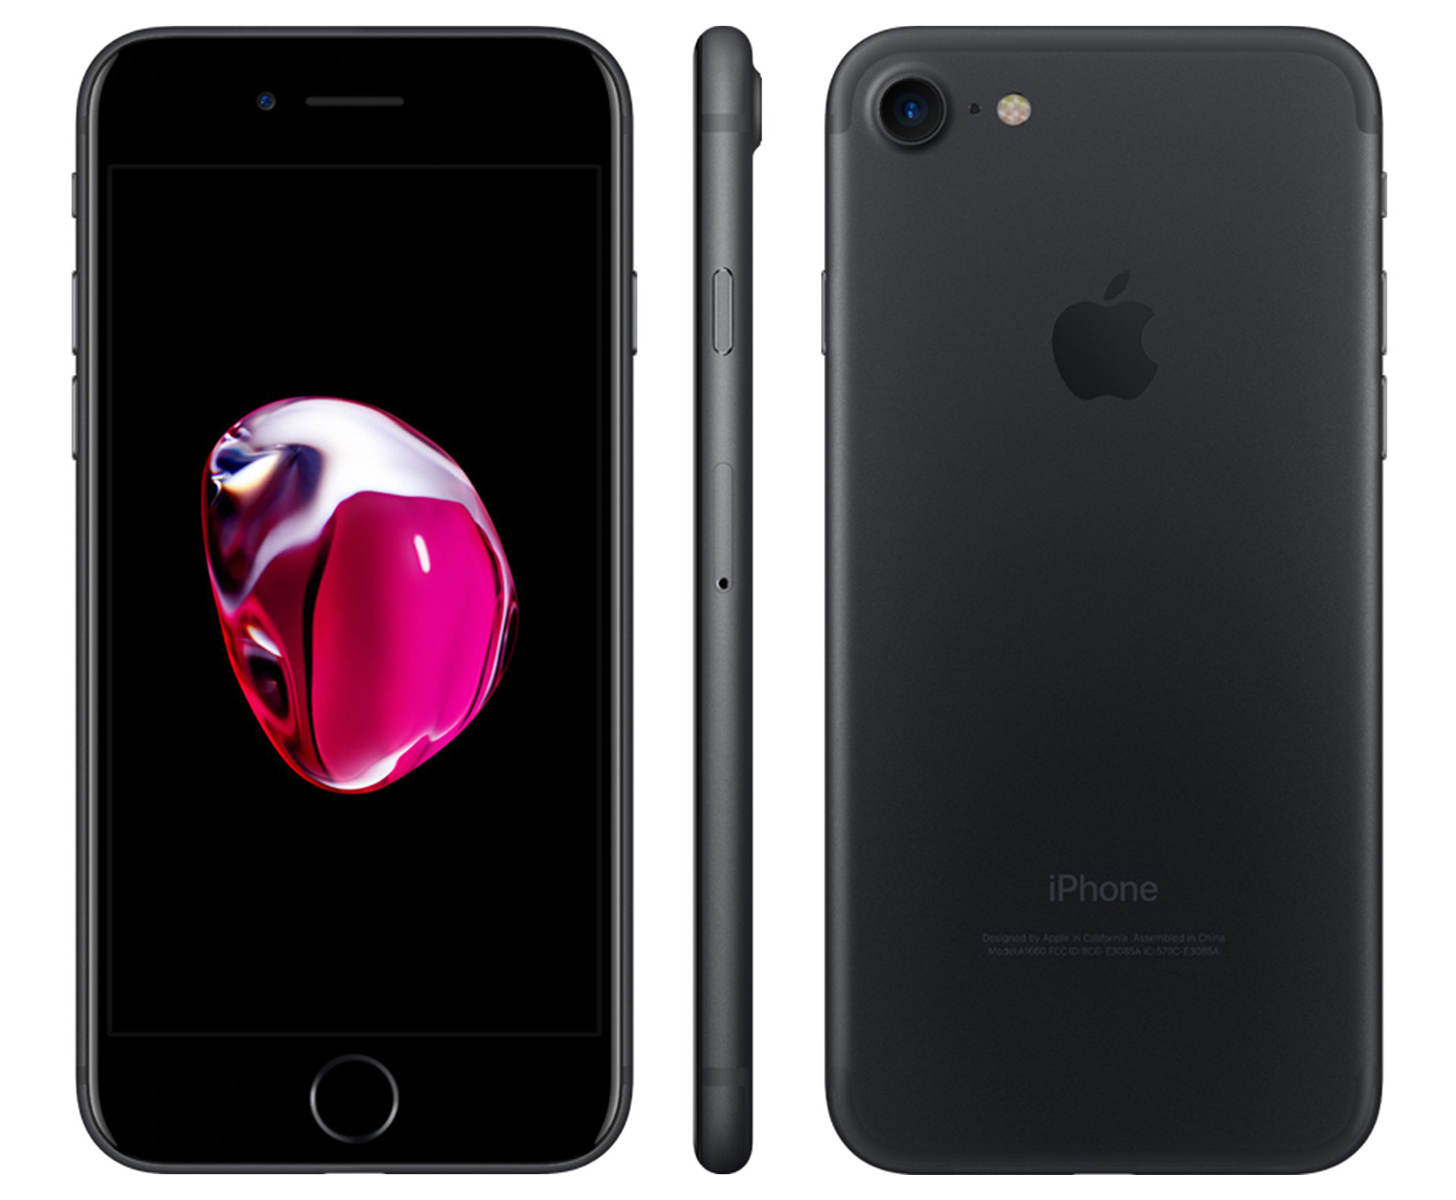 Straat Behandeling Momentum Metro by T-Mobile deal offers iPhone 7 for $49.99 - TmoNews